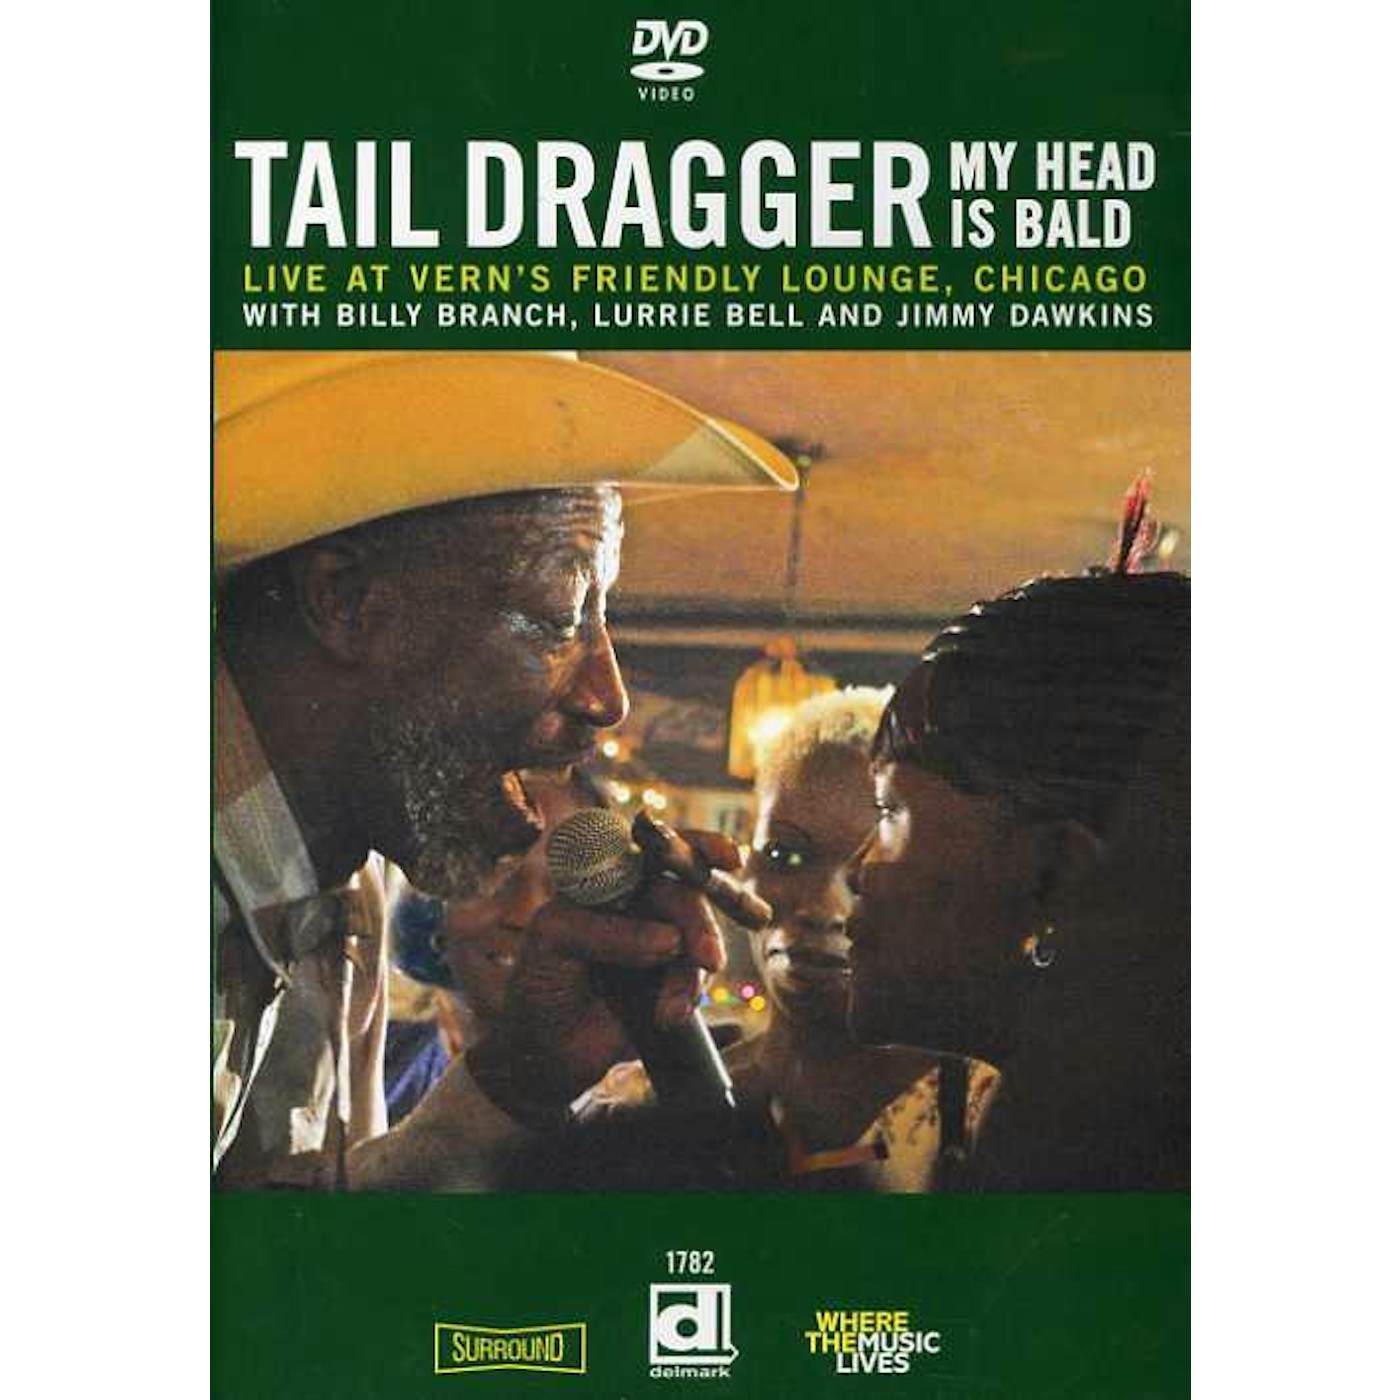 Tail Dragger MY HEAD IS BALD: LIVE AT VERN'S FRIENDLY LOUNGE DVD